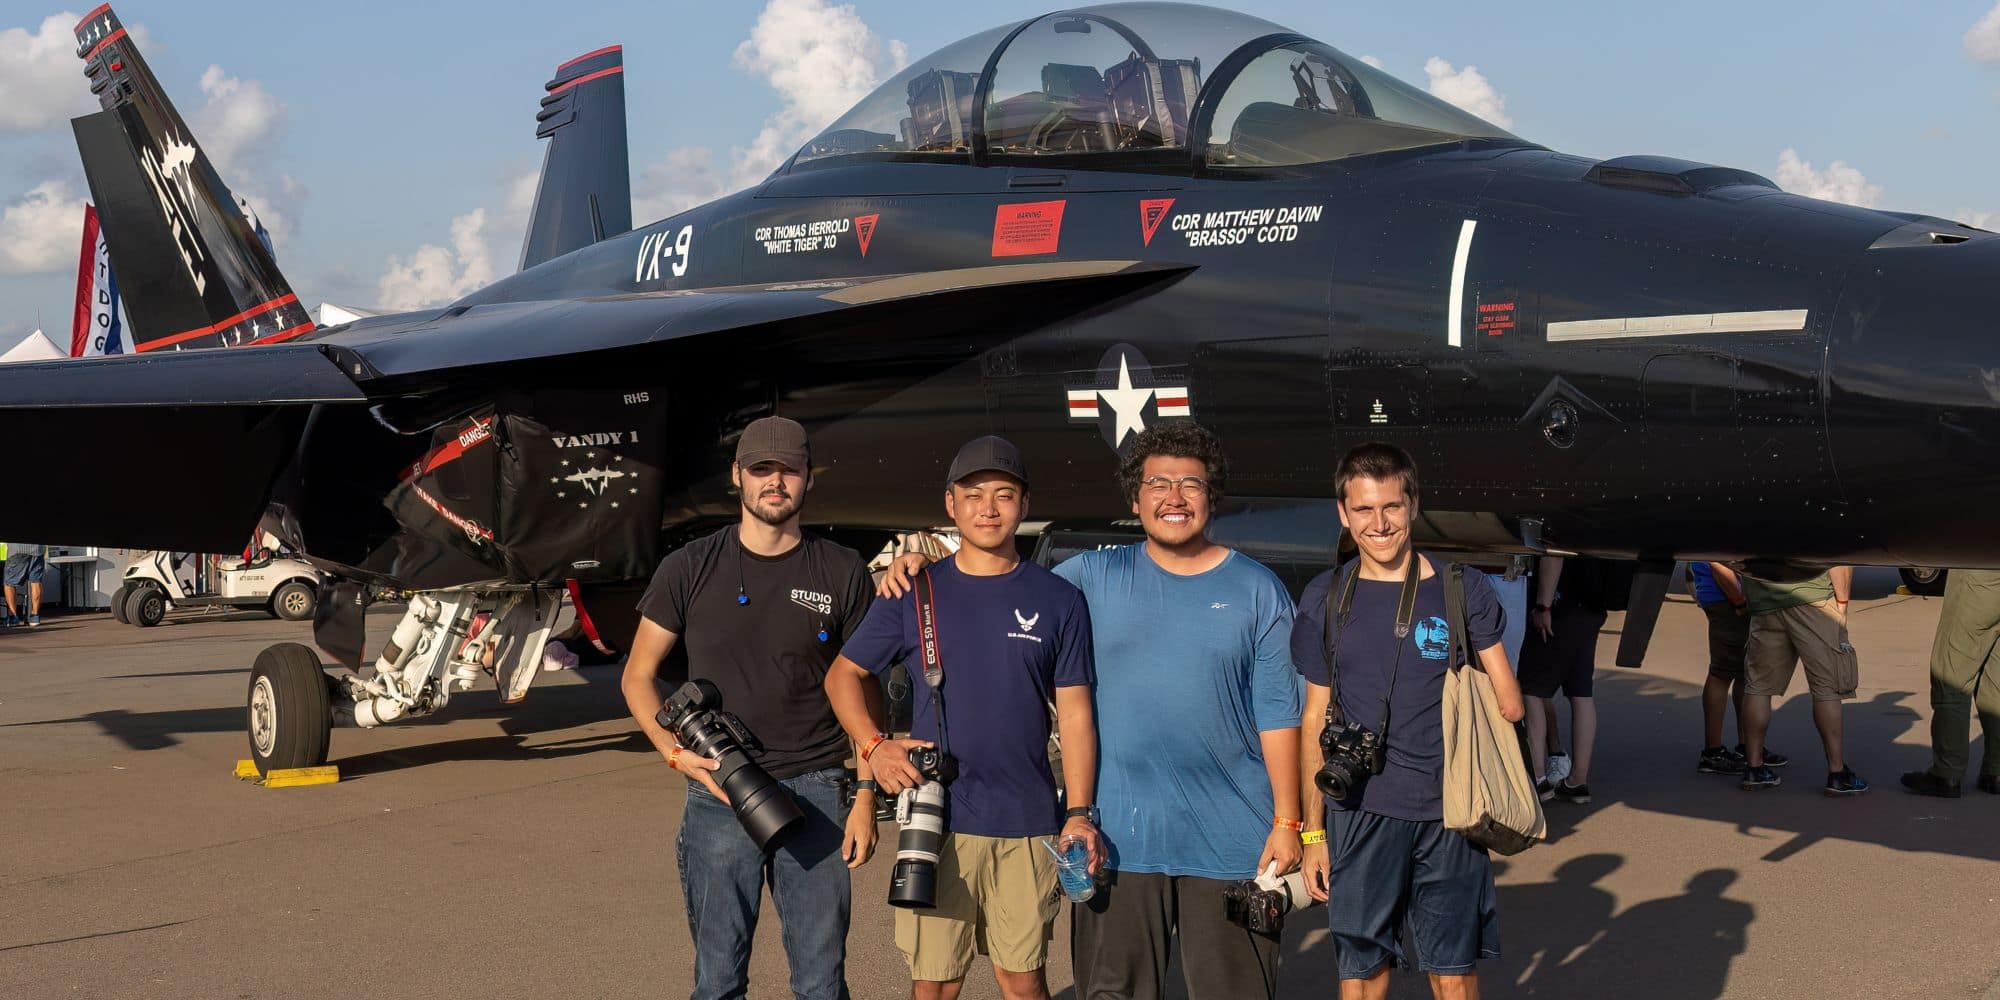 Bastien Melin, Hao Wu, Wen Wu and fellow photographer Chris (last name to come) pose in front of an F-18 during Sun ‘n Fun 2023.